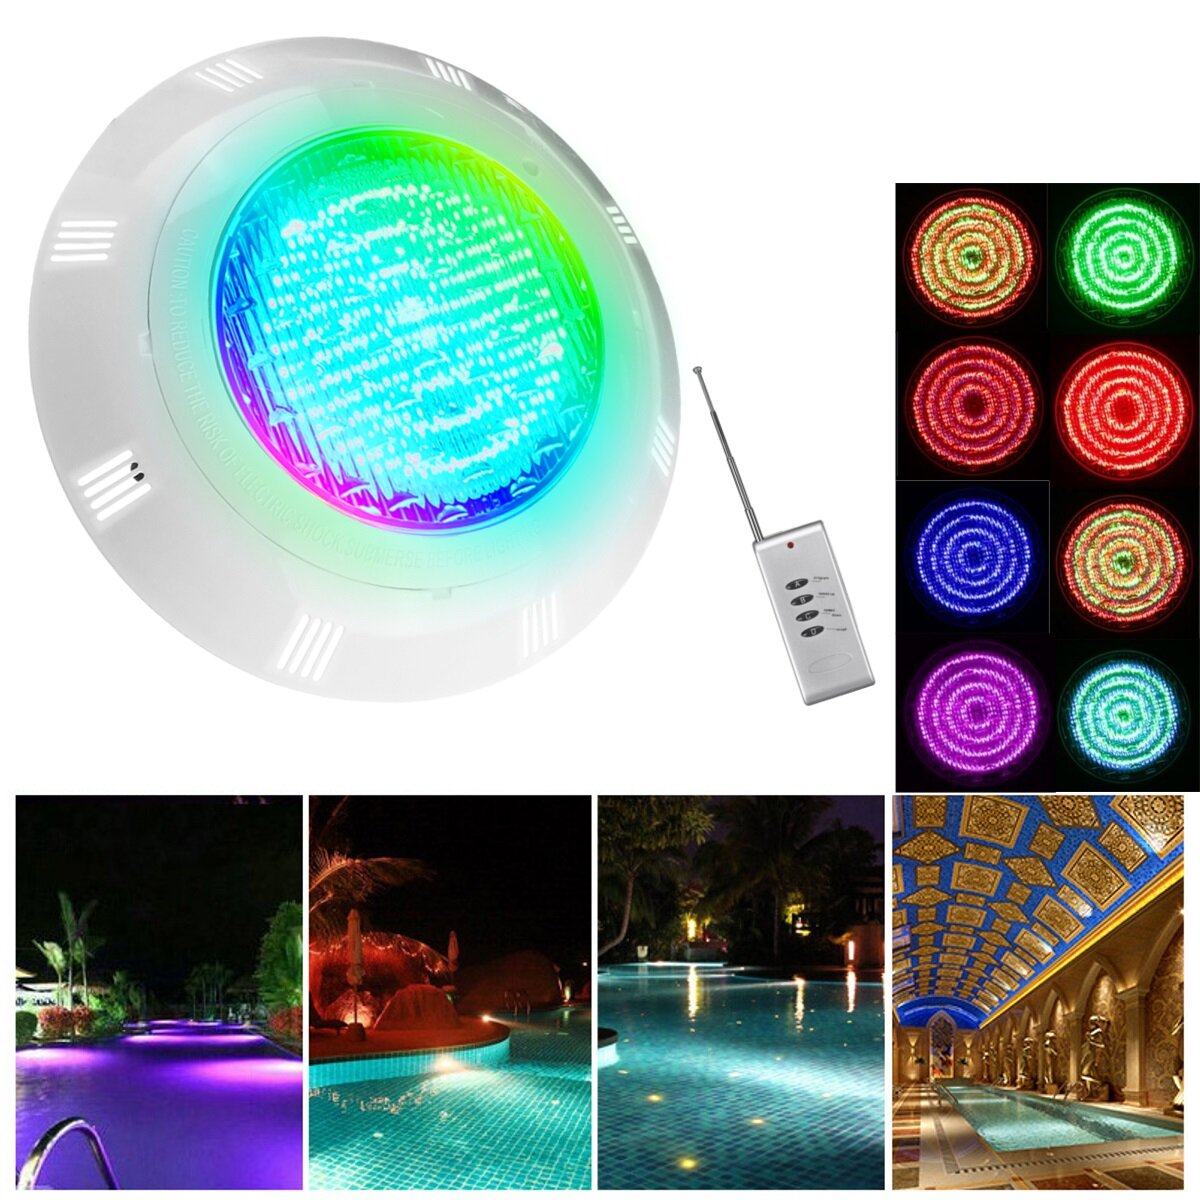 15W/30W Swimming Pool Light RGB LED Underwater Color Vase Decor Lights with Remote Control